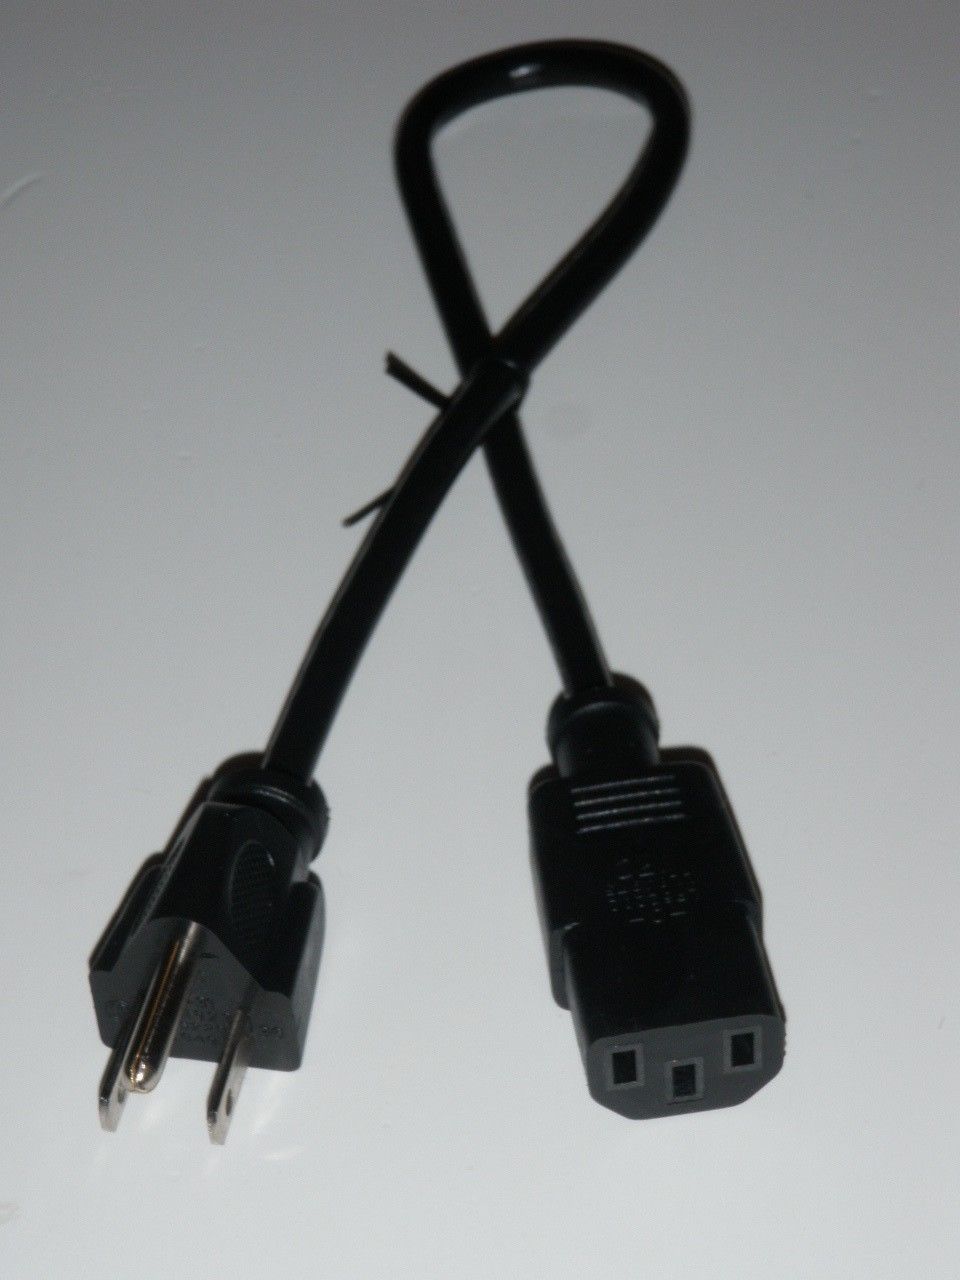 3pin Power Cord for Chef Tested Pressure Cooker Model EPC-668 (Choose Length) - $11.75 - $16.65